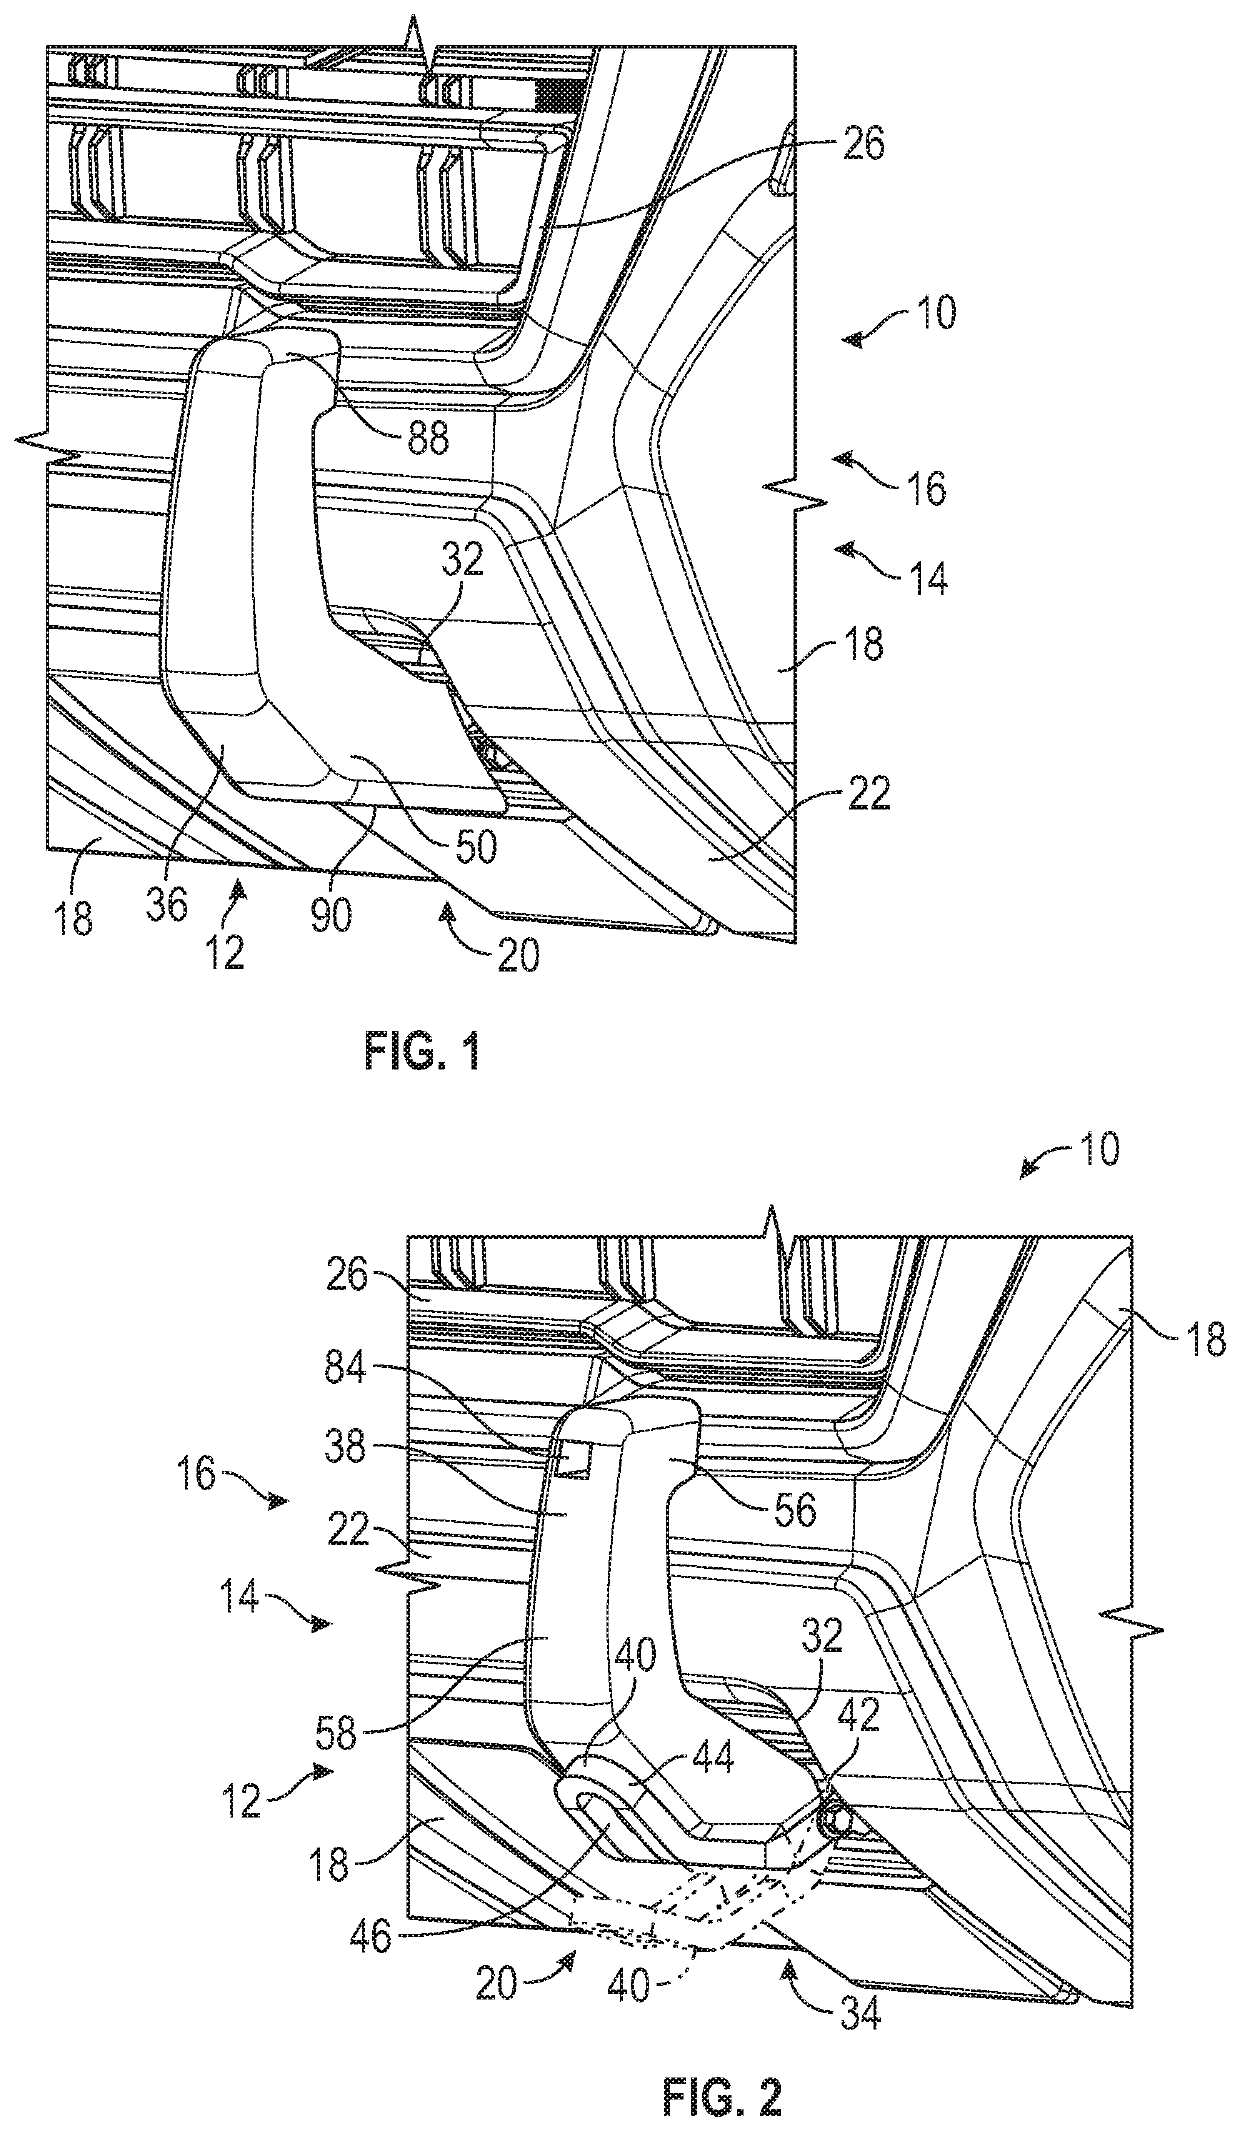 Accessory assembly for a bumper region of a vehicle and a vehicle bumper accessory assembly